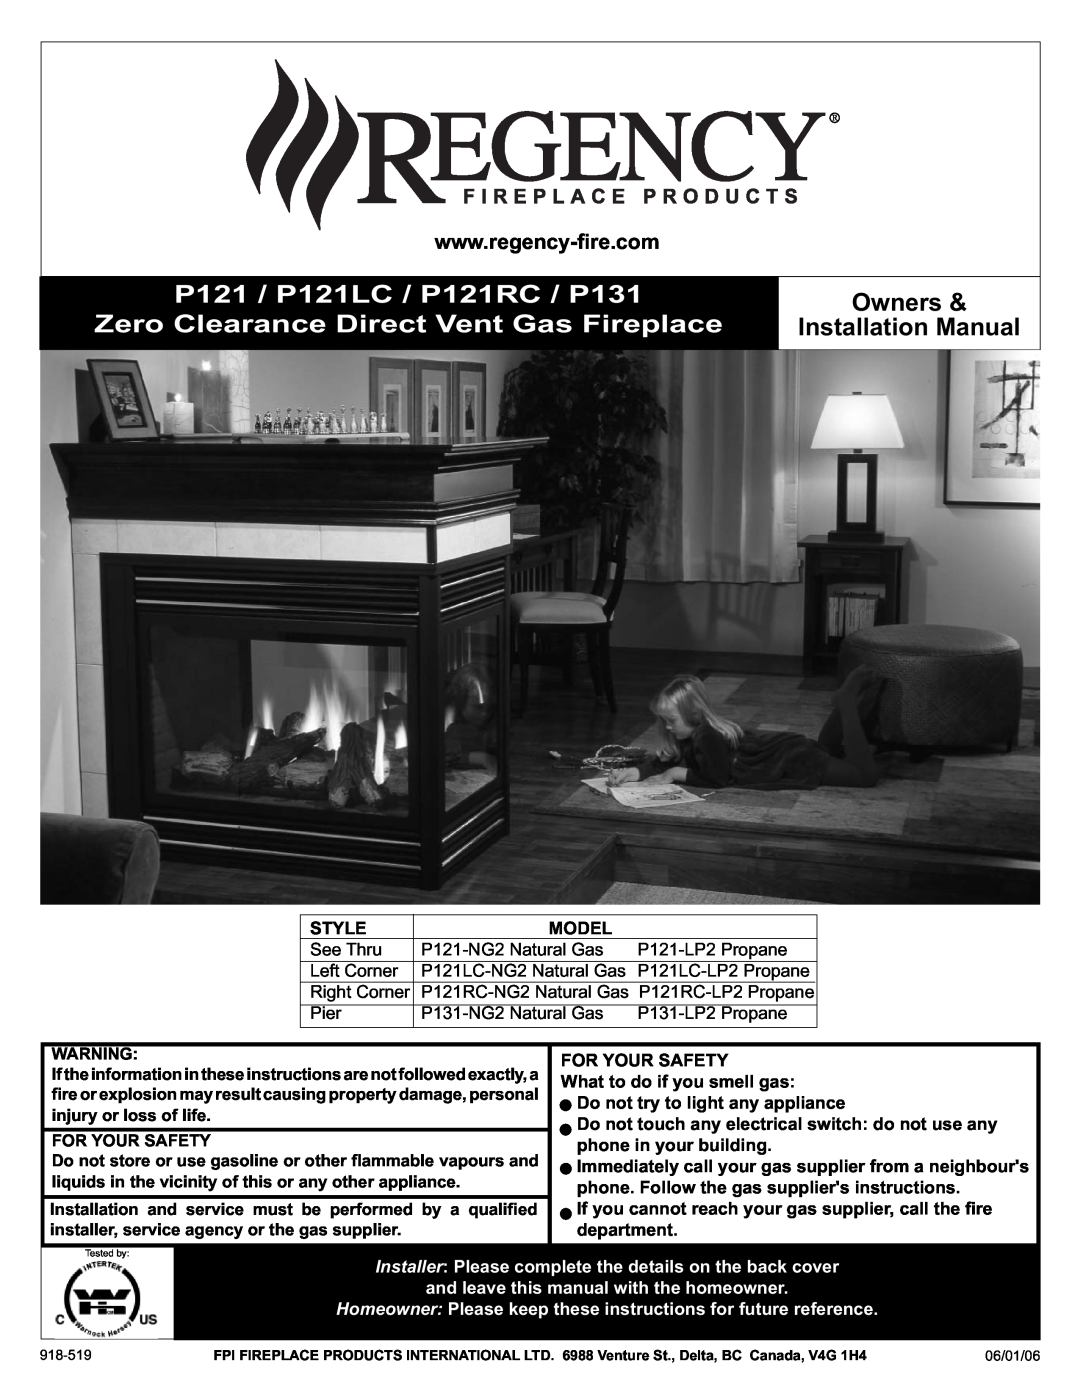 Regency installation manual P121 / P121LC / P121RC / P131, Zero Clearance Direct Vent Gas Fireplace, Owners, Style 